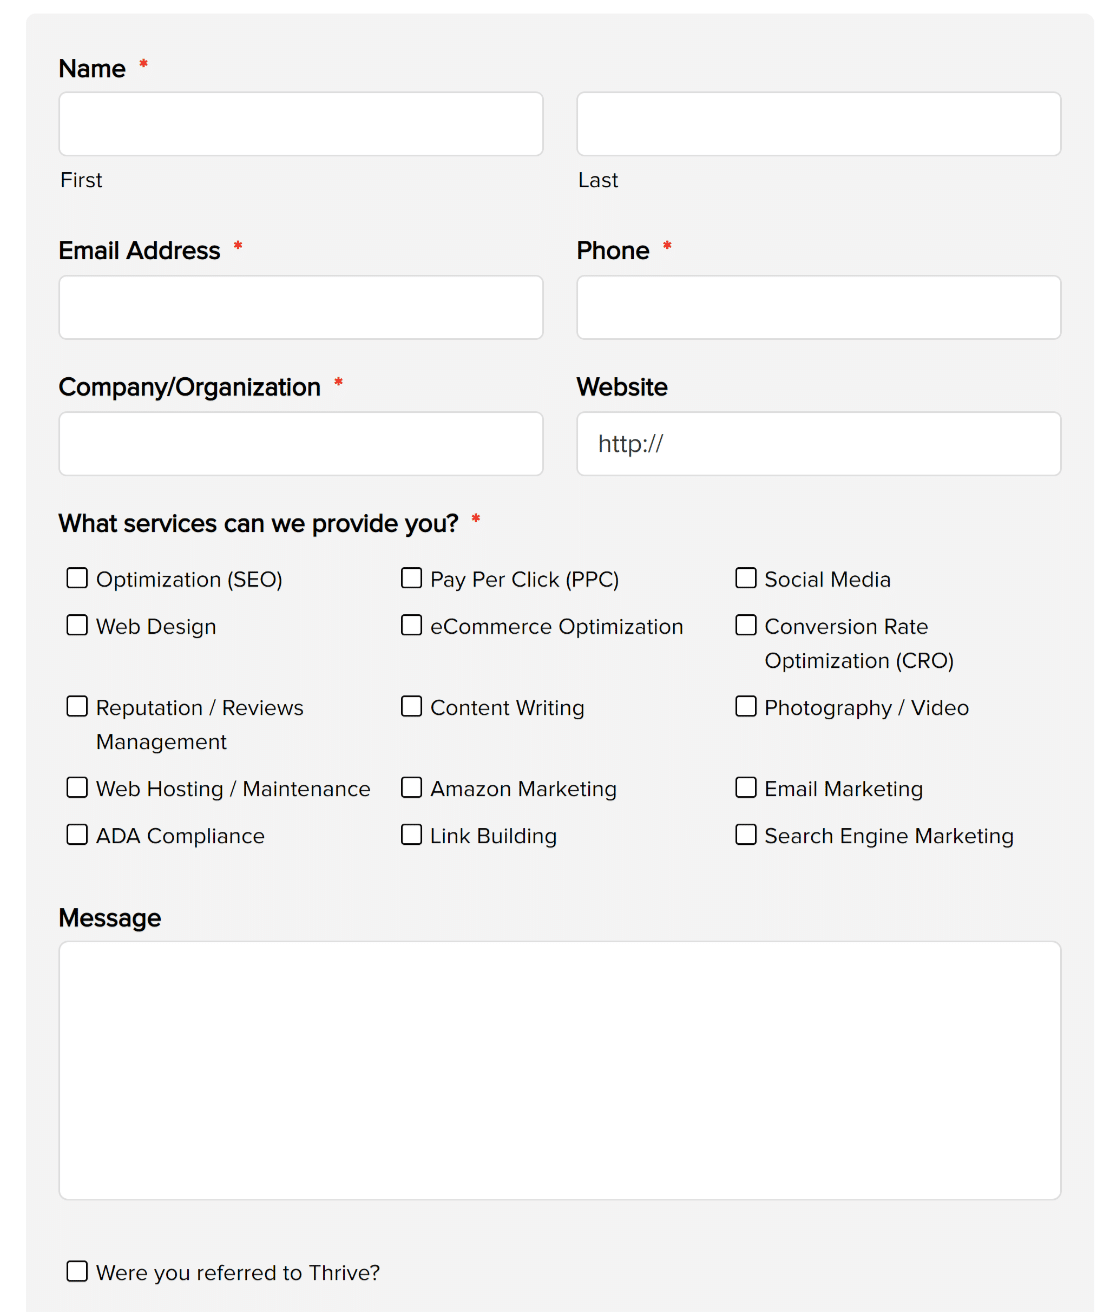 An example of a client intake form for a marketing agency